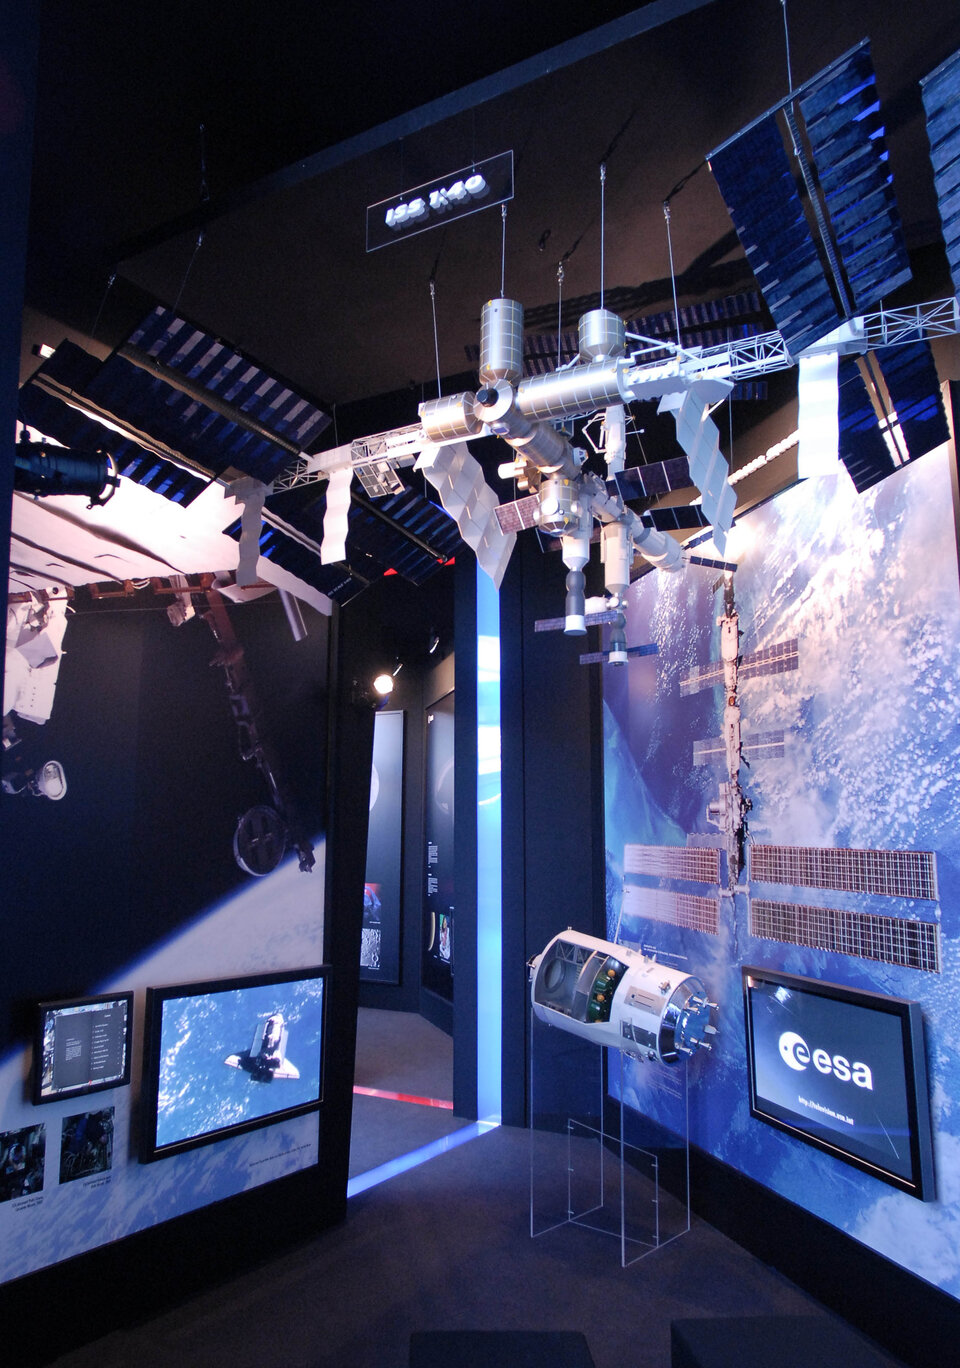 The space infrastructure area shows Europe’s contribution to the ISS